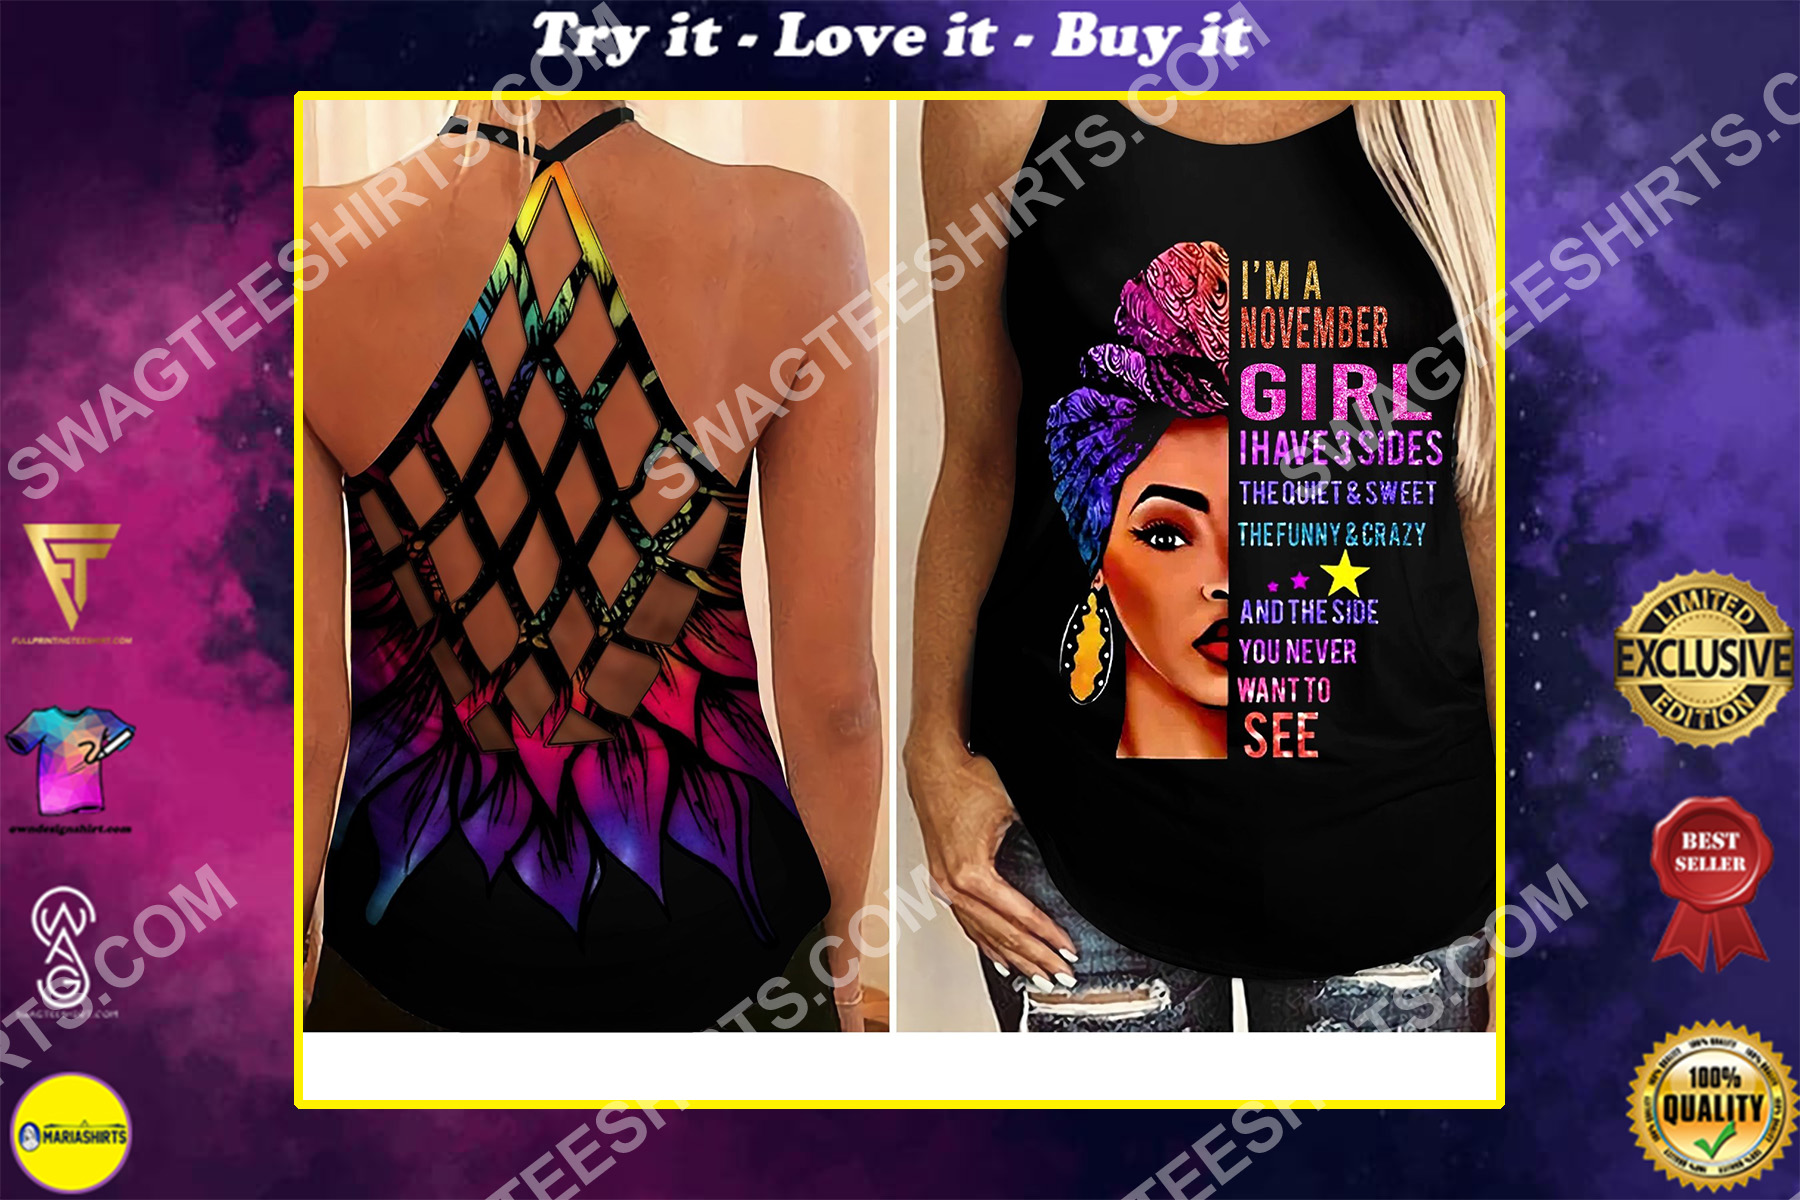 i'm a november girl i have 3 sides the quiet and sweet all over printed criss-cross tank top